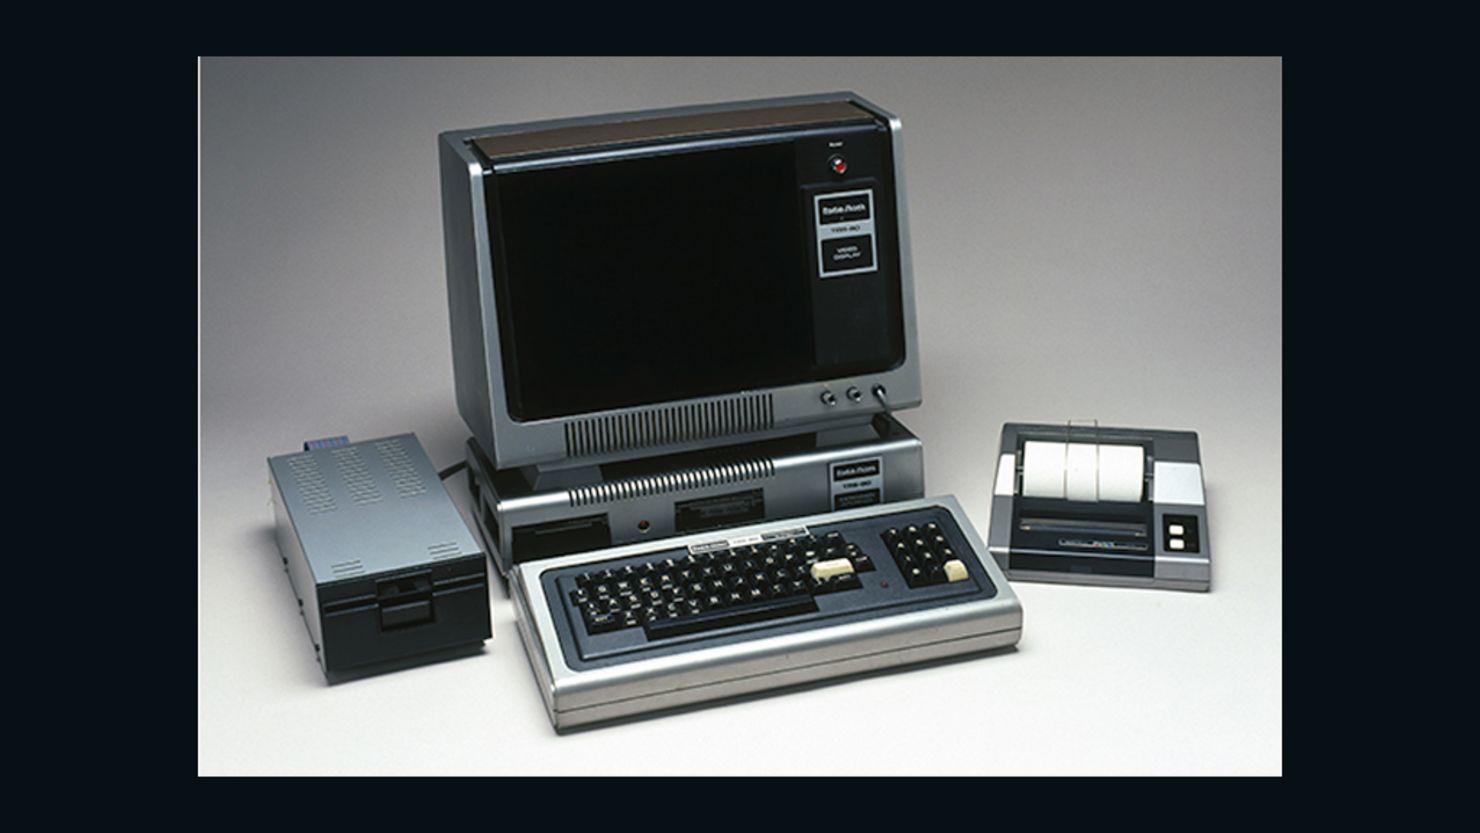 TRS-80 haters had a favorite put-down, which they used at every possible opportunity: They called it the Trash-80.